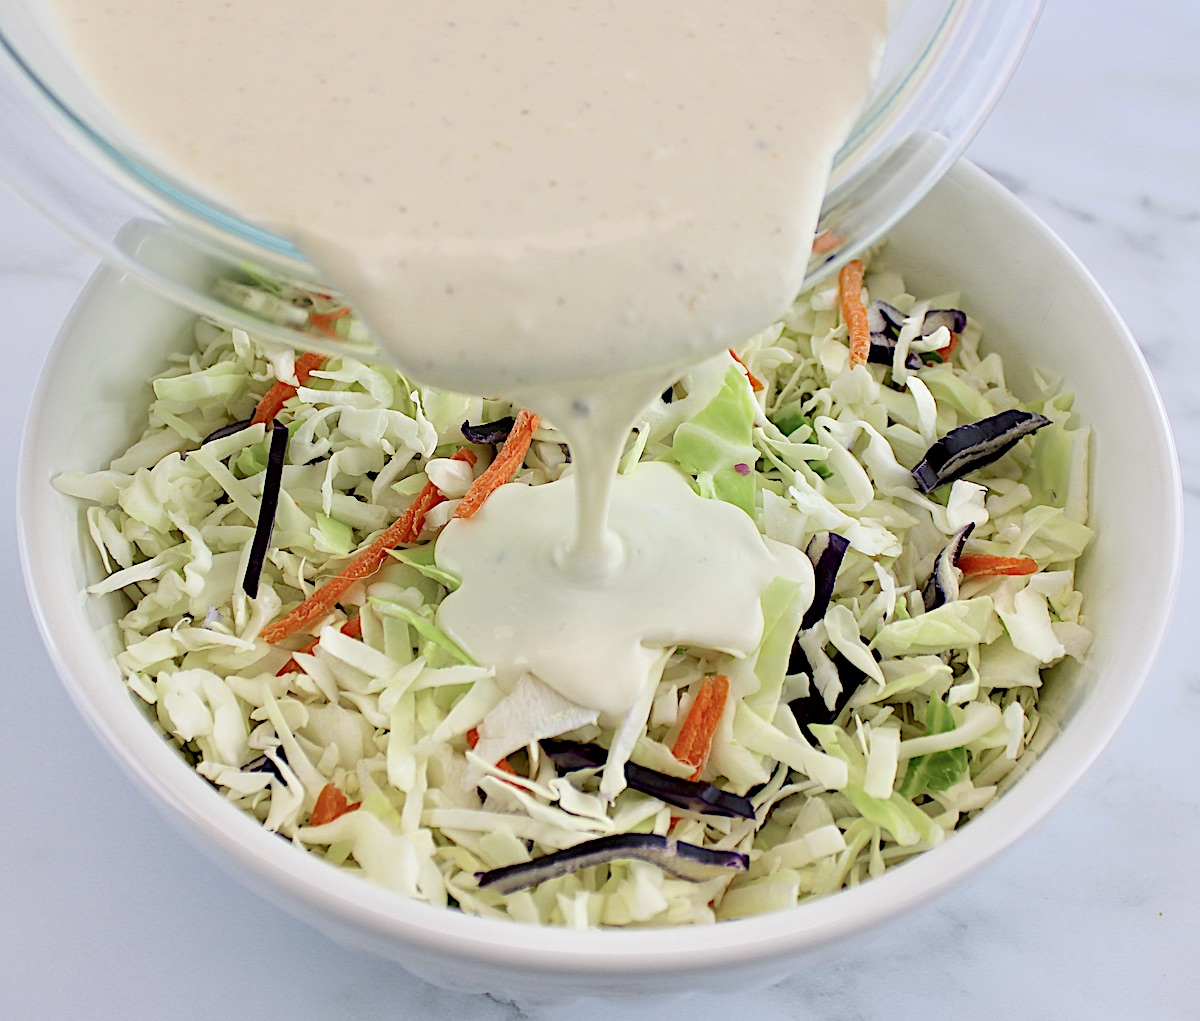 coleslaw dressing being poured over slaw mix in white bowl